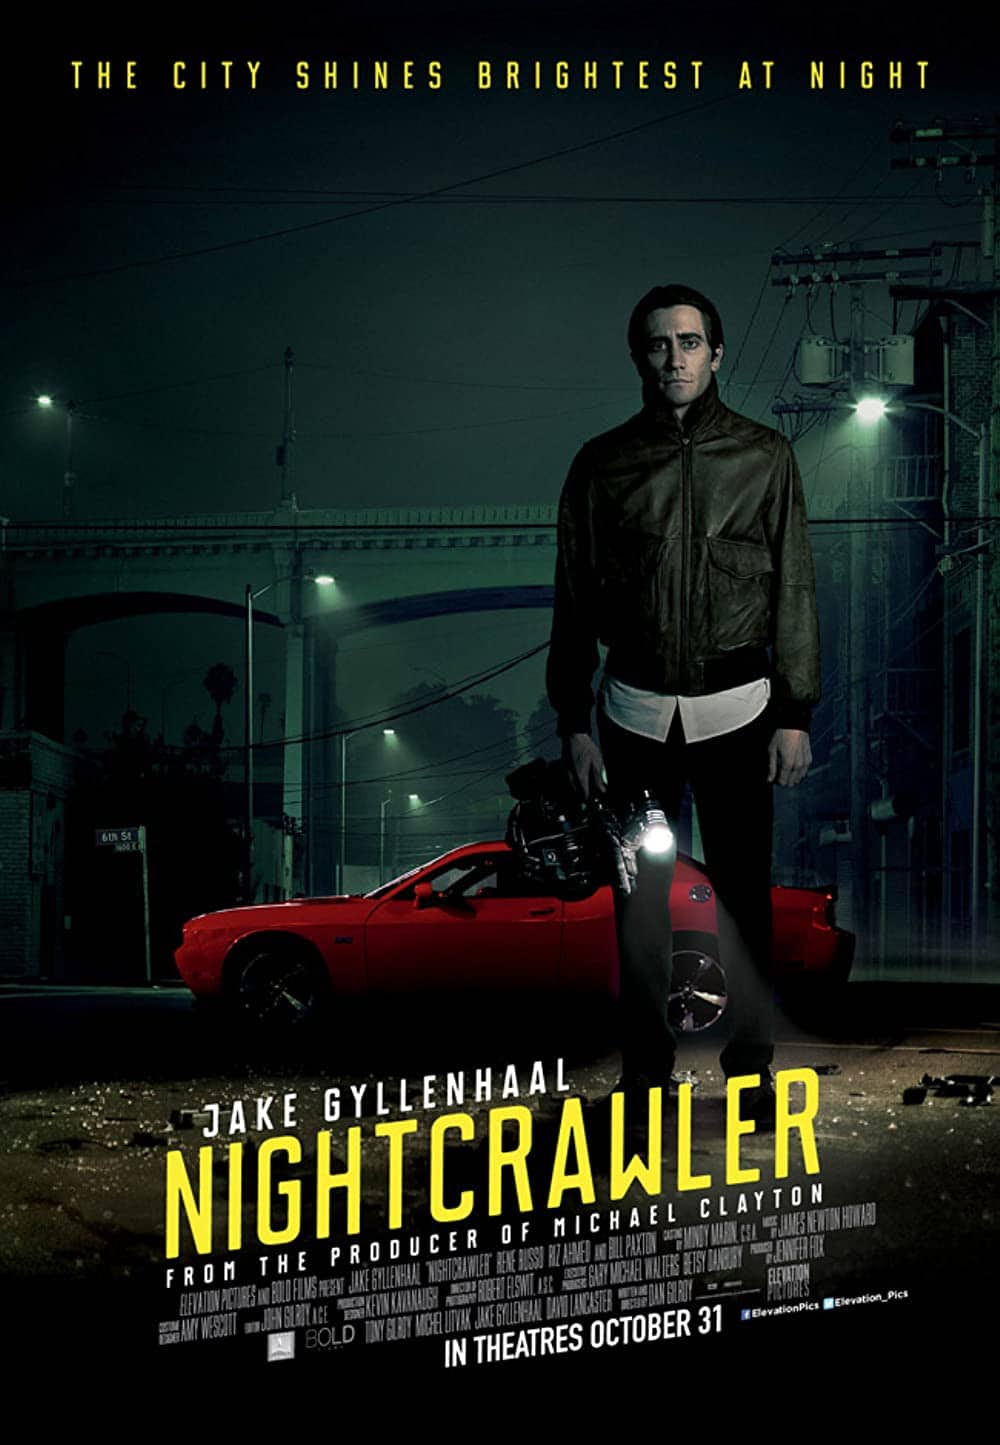 Nightcrawler (2014) Cult Movies You Should Binge-Watch this Holiday